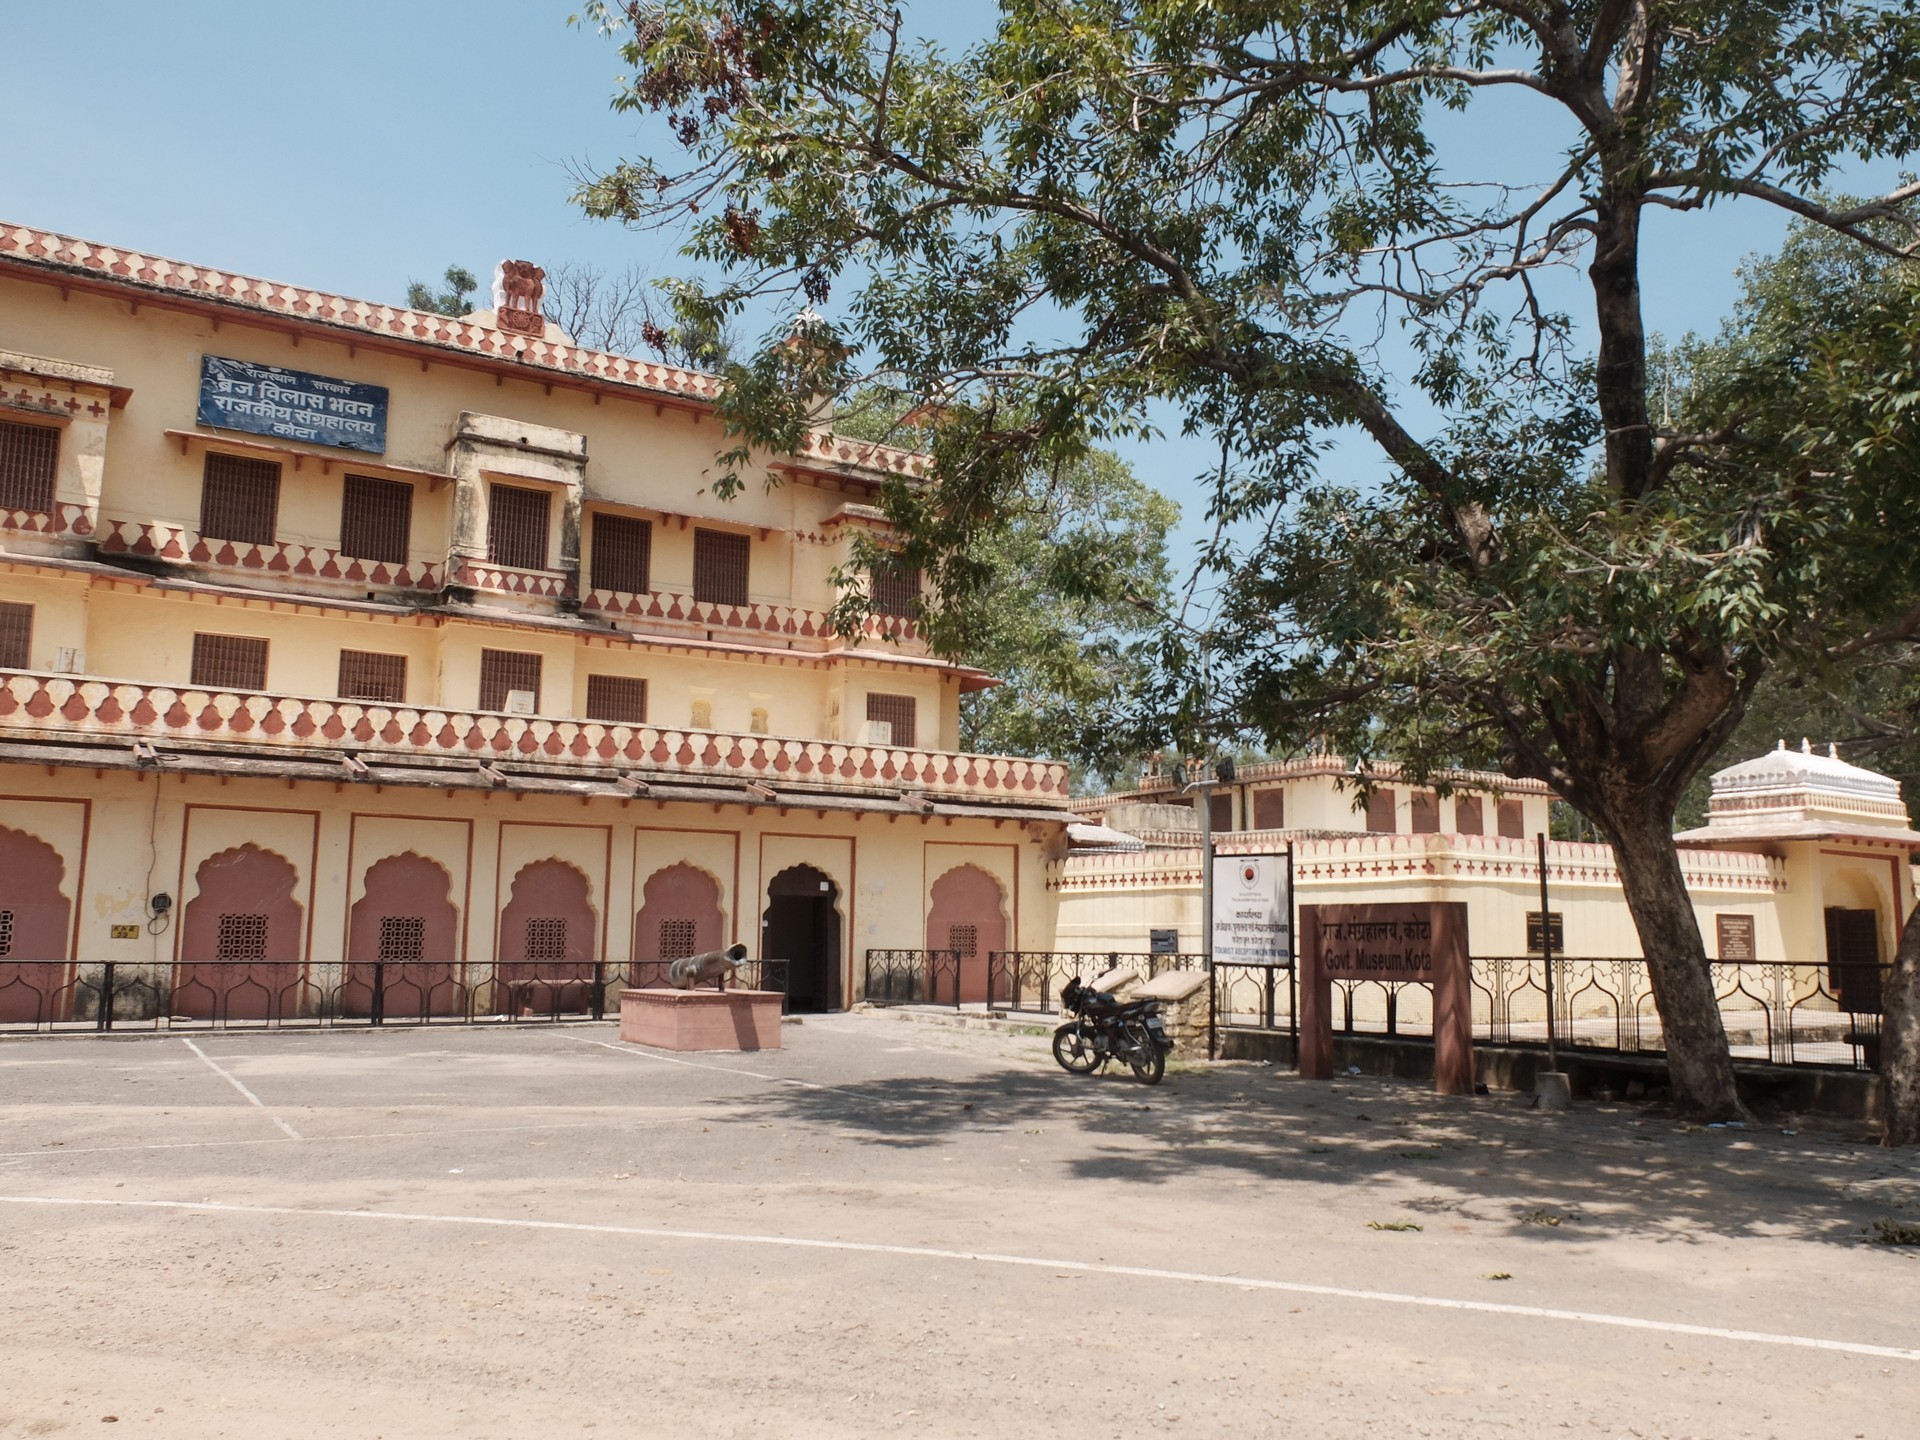 The magnificent 17th century Palace called Brij Vilas Bhawan makes a superb State archaeological museum and has its own interesting architectural features such as a baori and baradari.